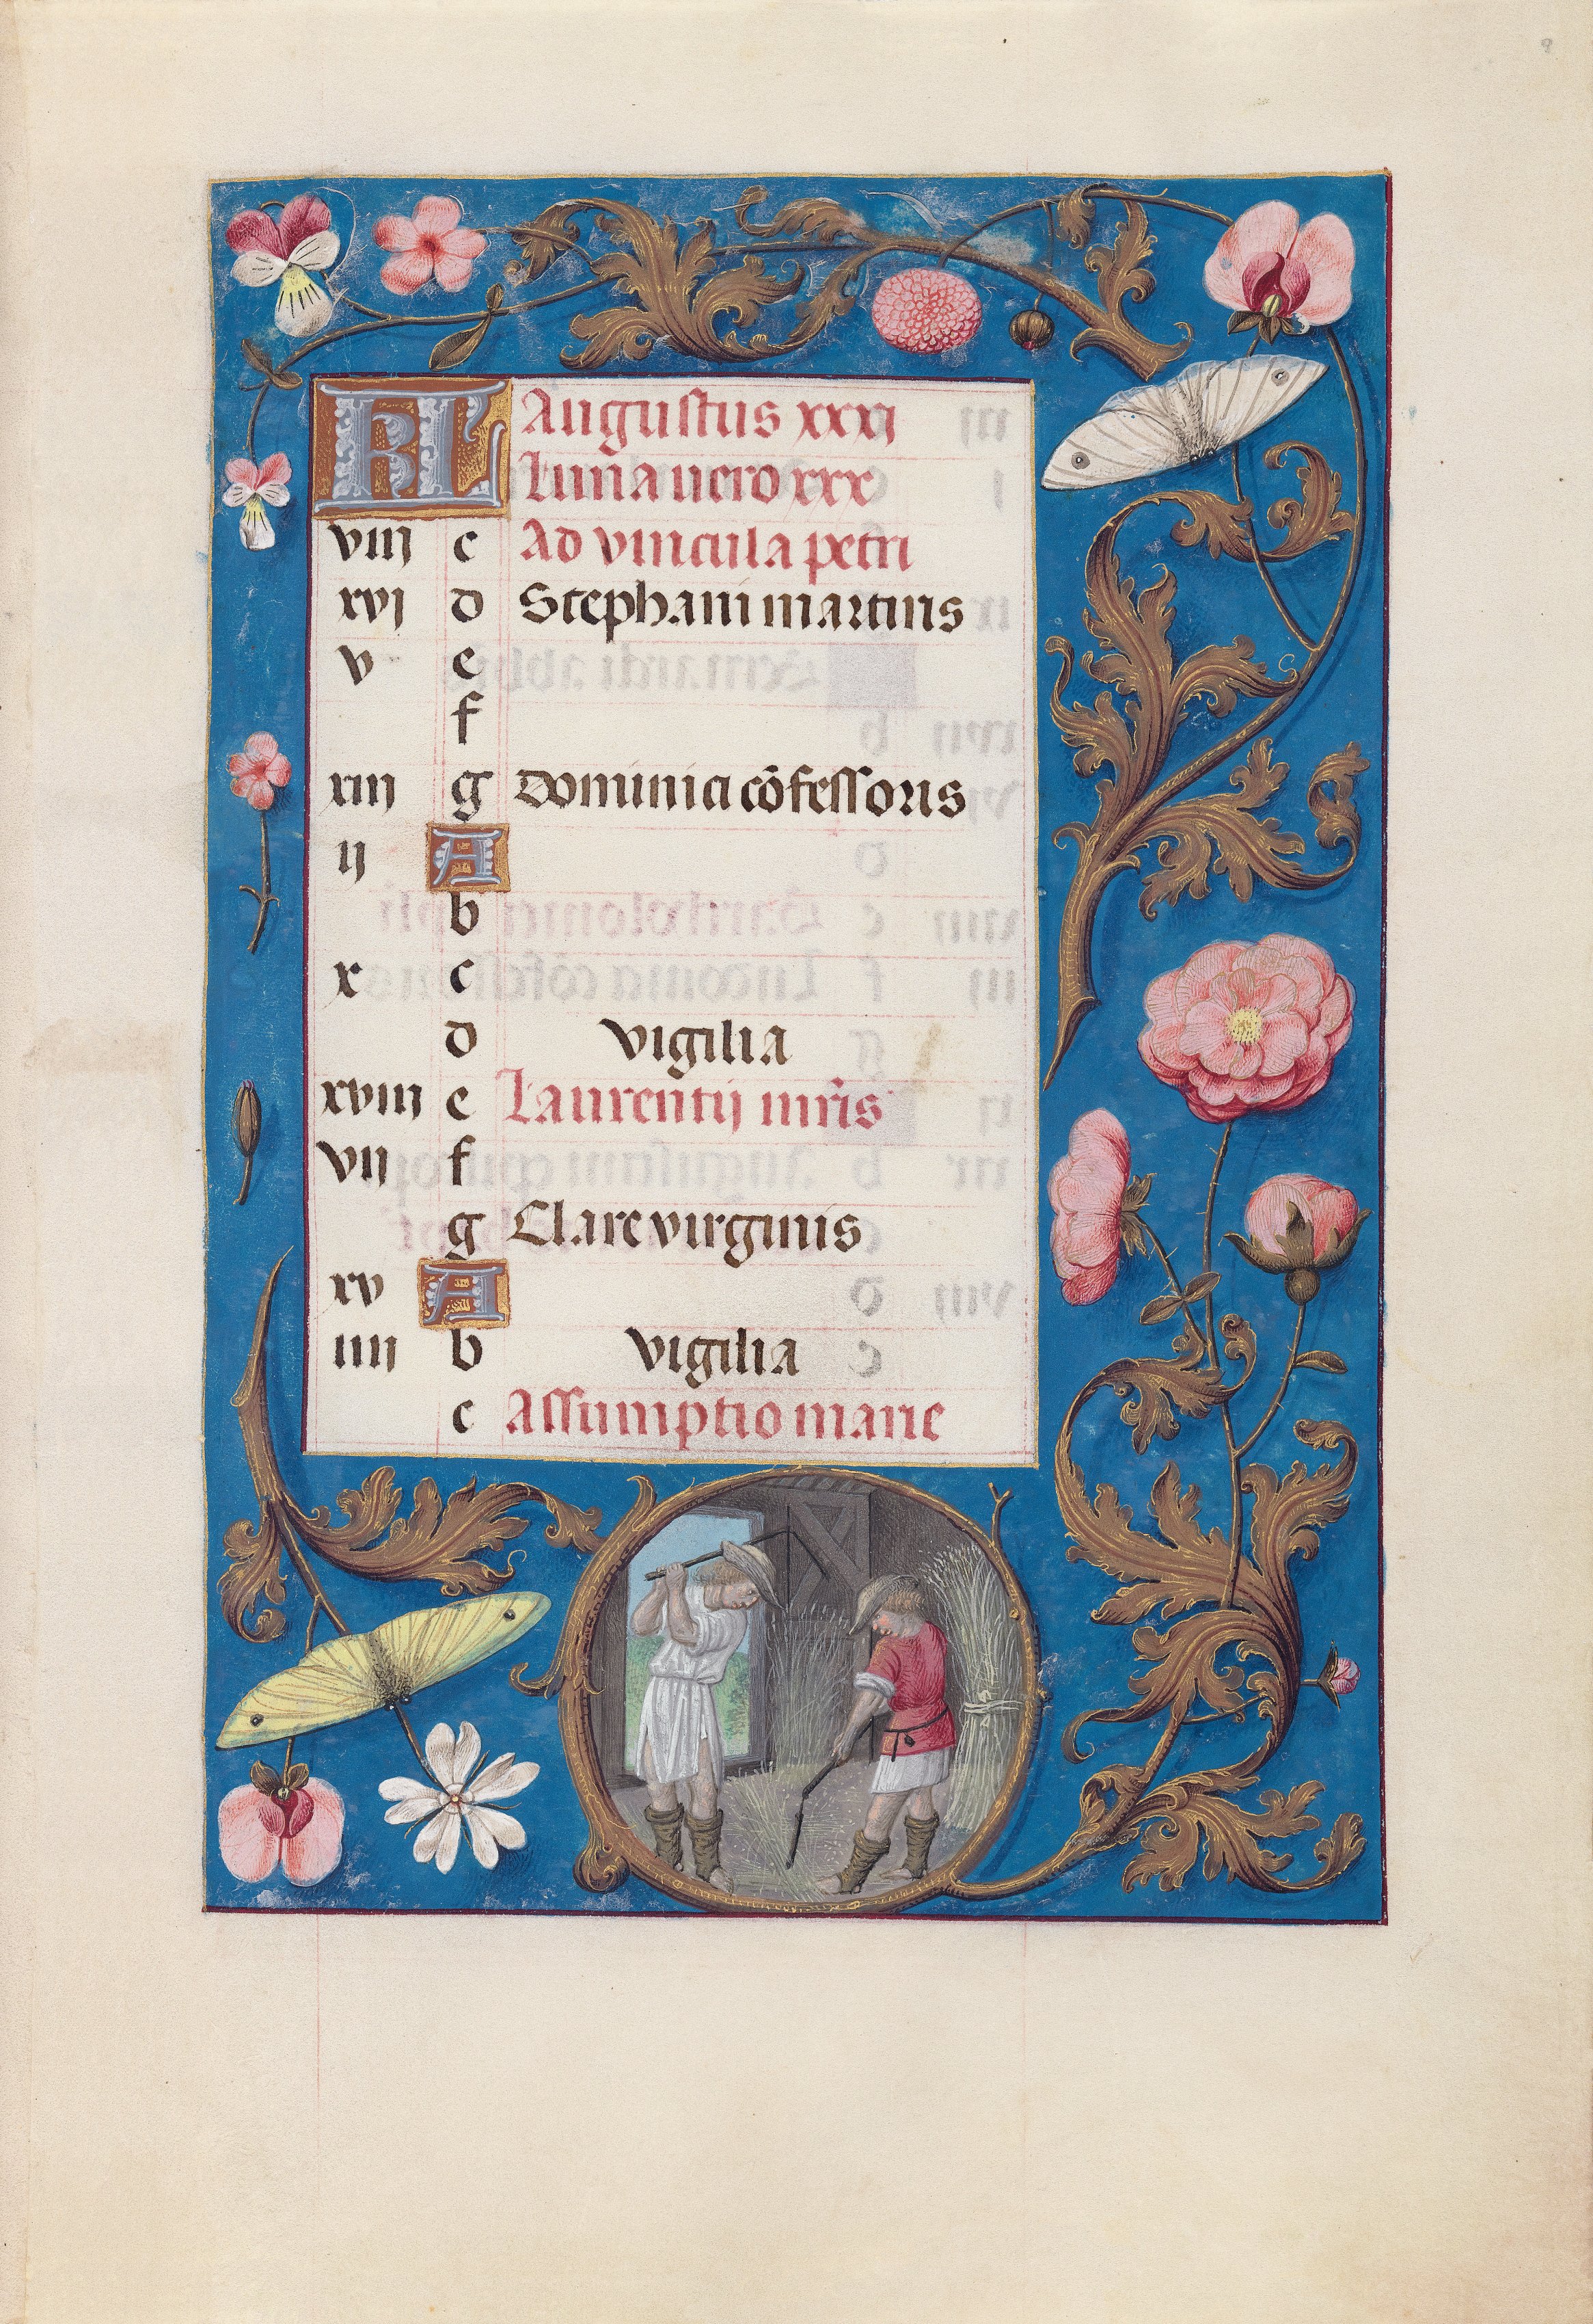 Hours of Queen Isabella the Catholic, Queen of Spain:  Fol. 9r, August - Threshing Wheat